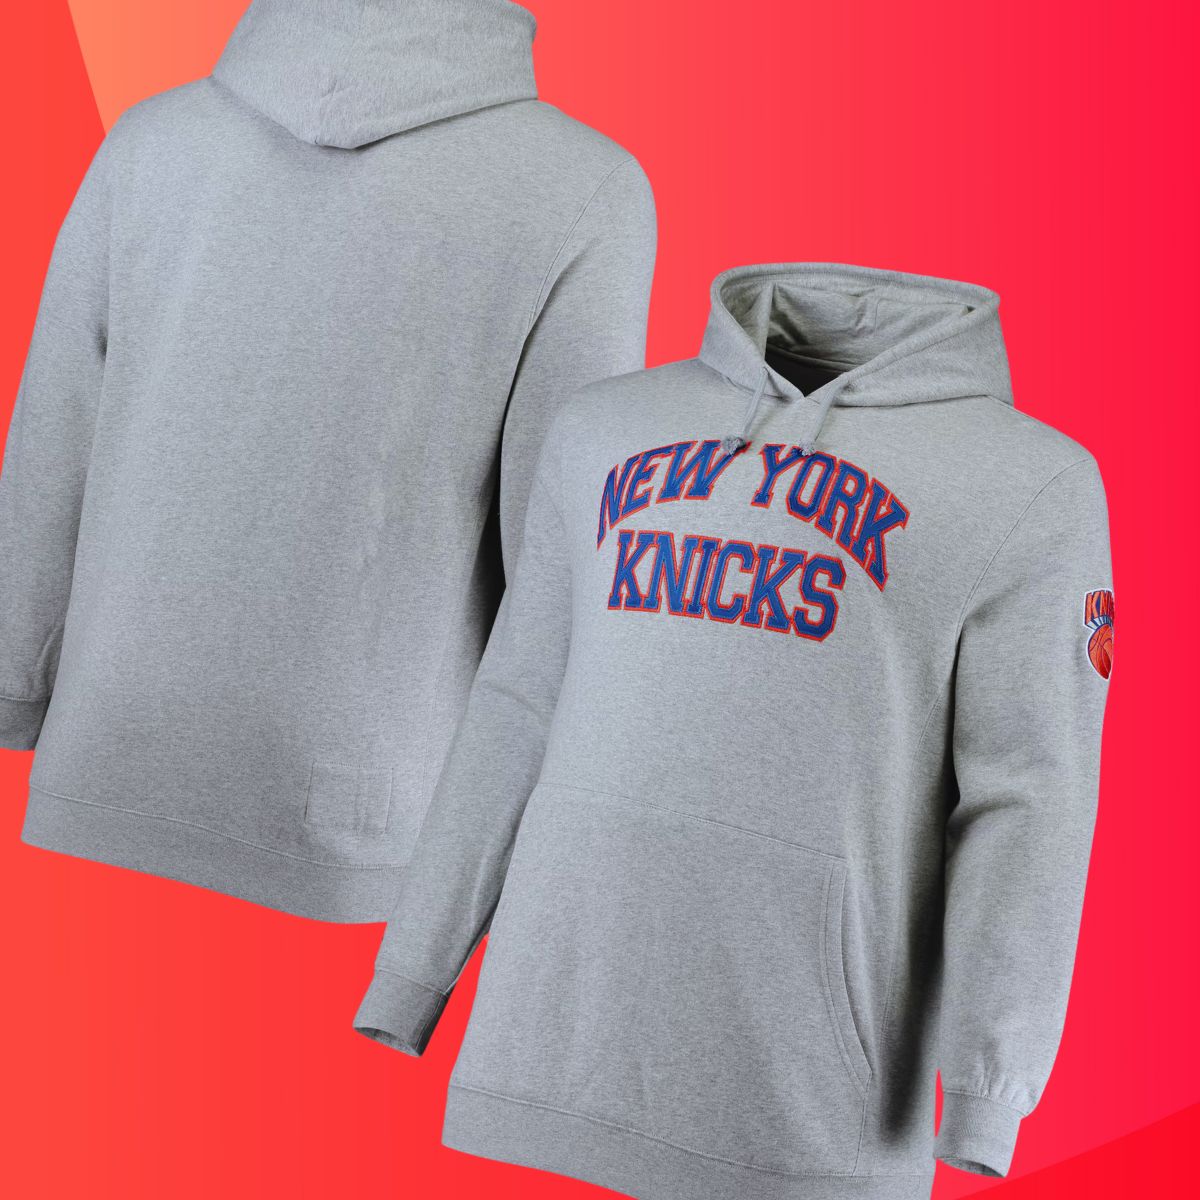 Where to Buy Finding a Knicks Hoodie in New York City's Stores